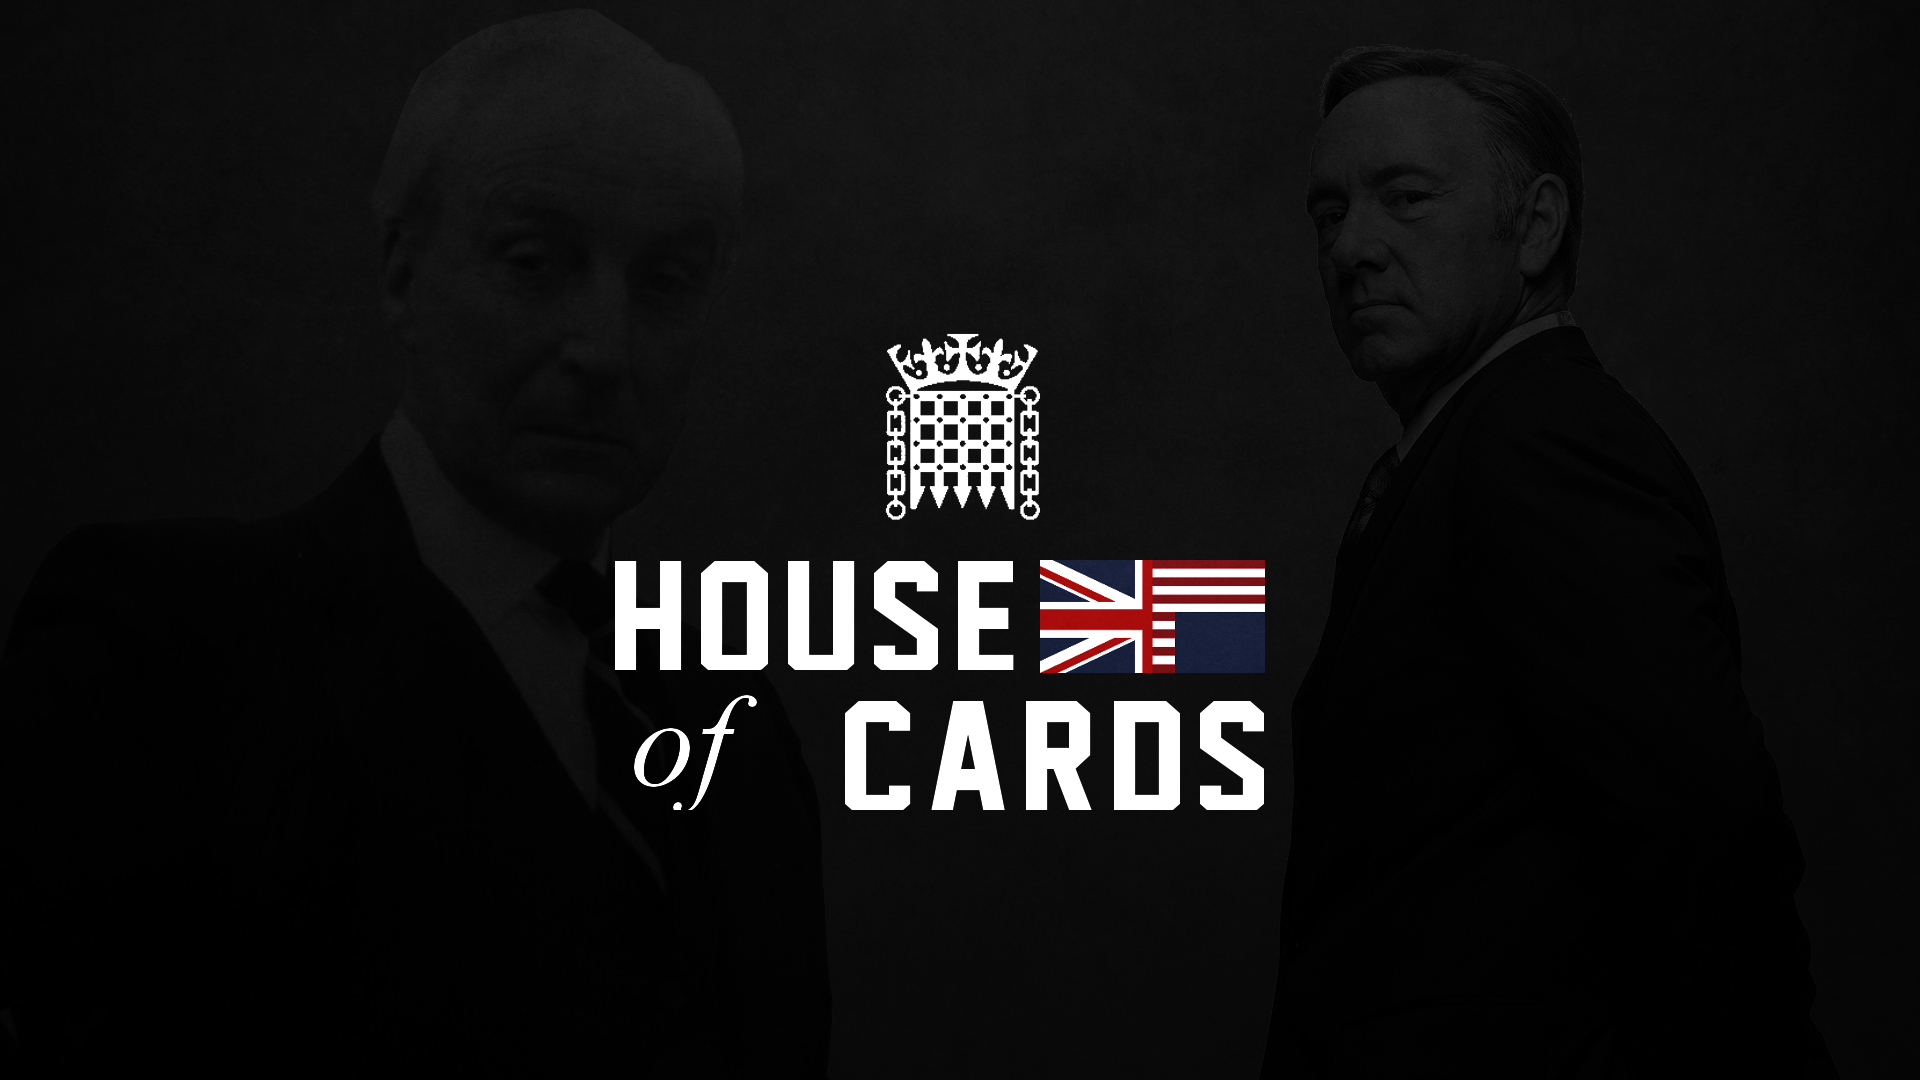 House Of Cards Hd Wallpaper Automotive Wallpapers